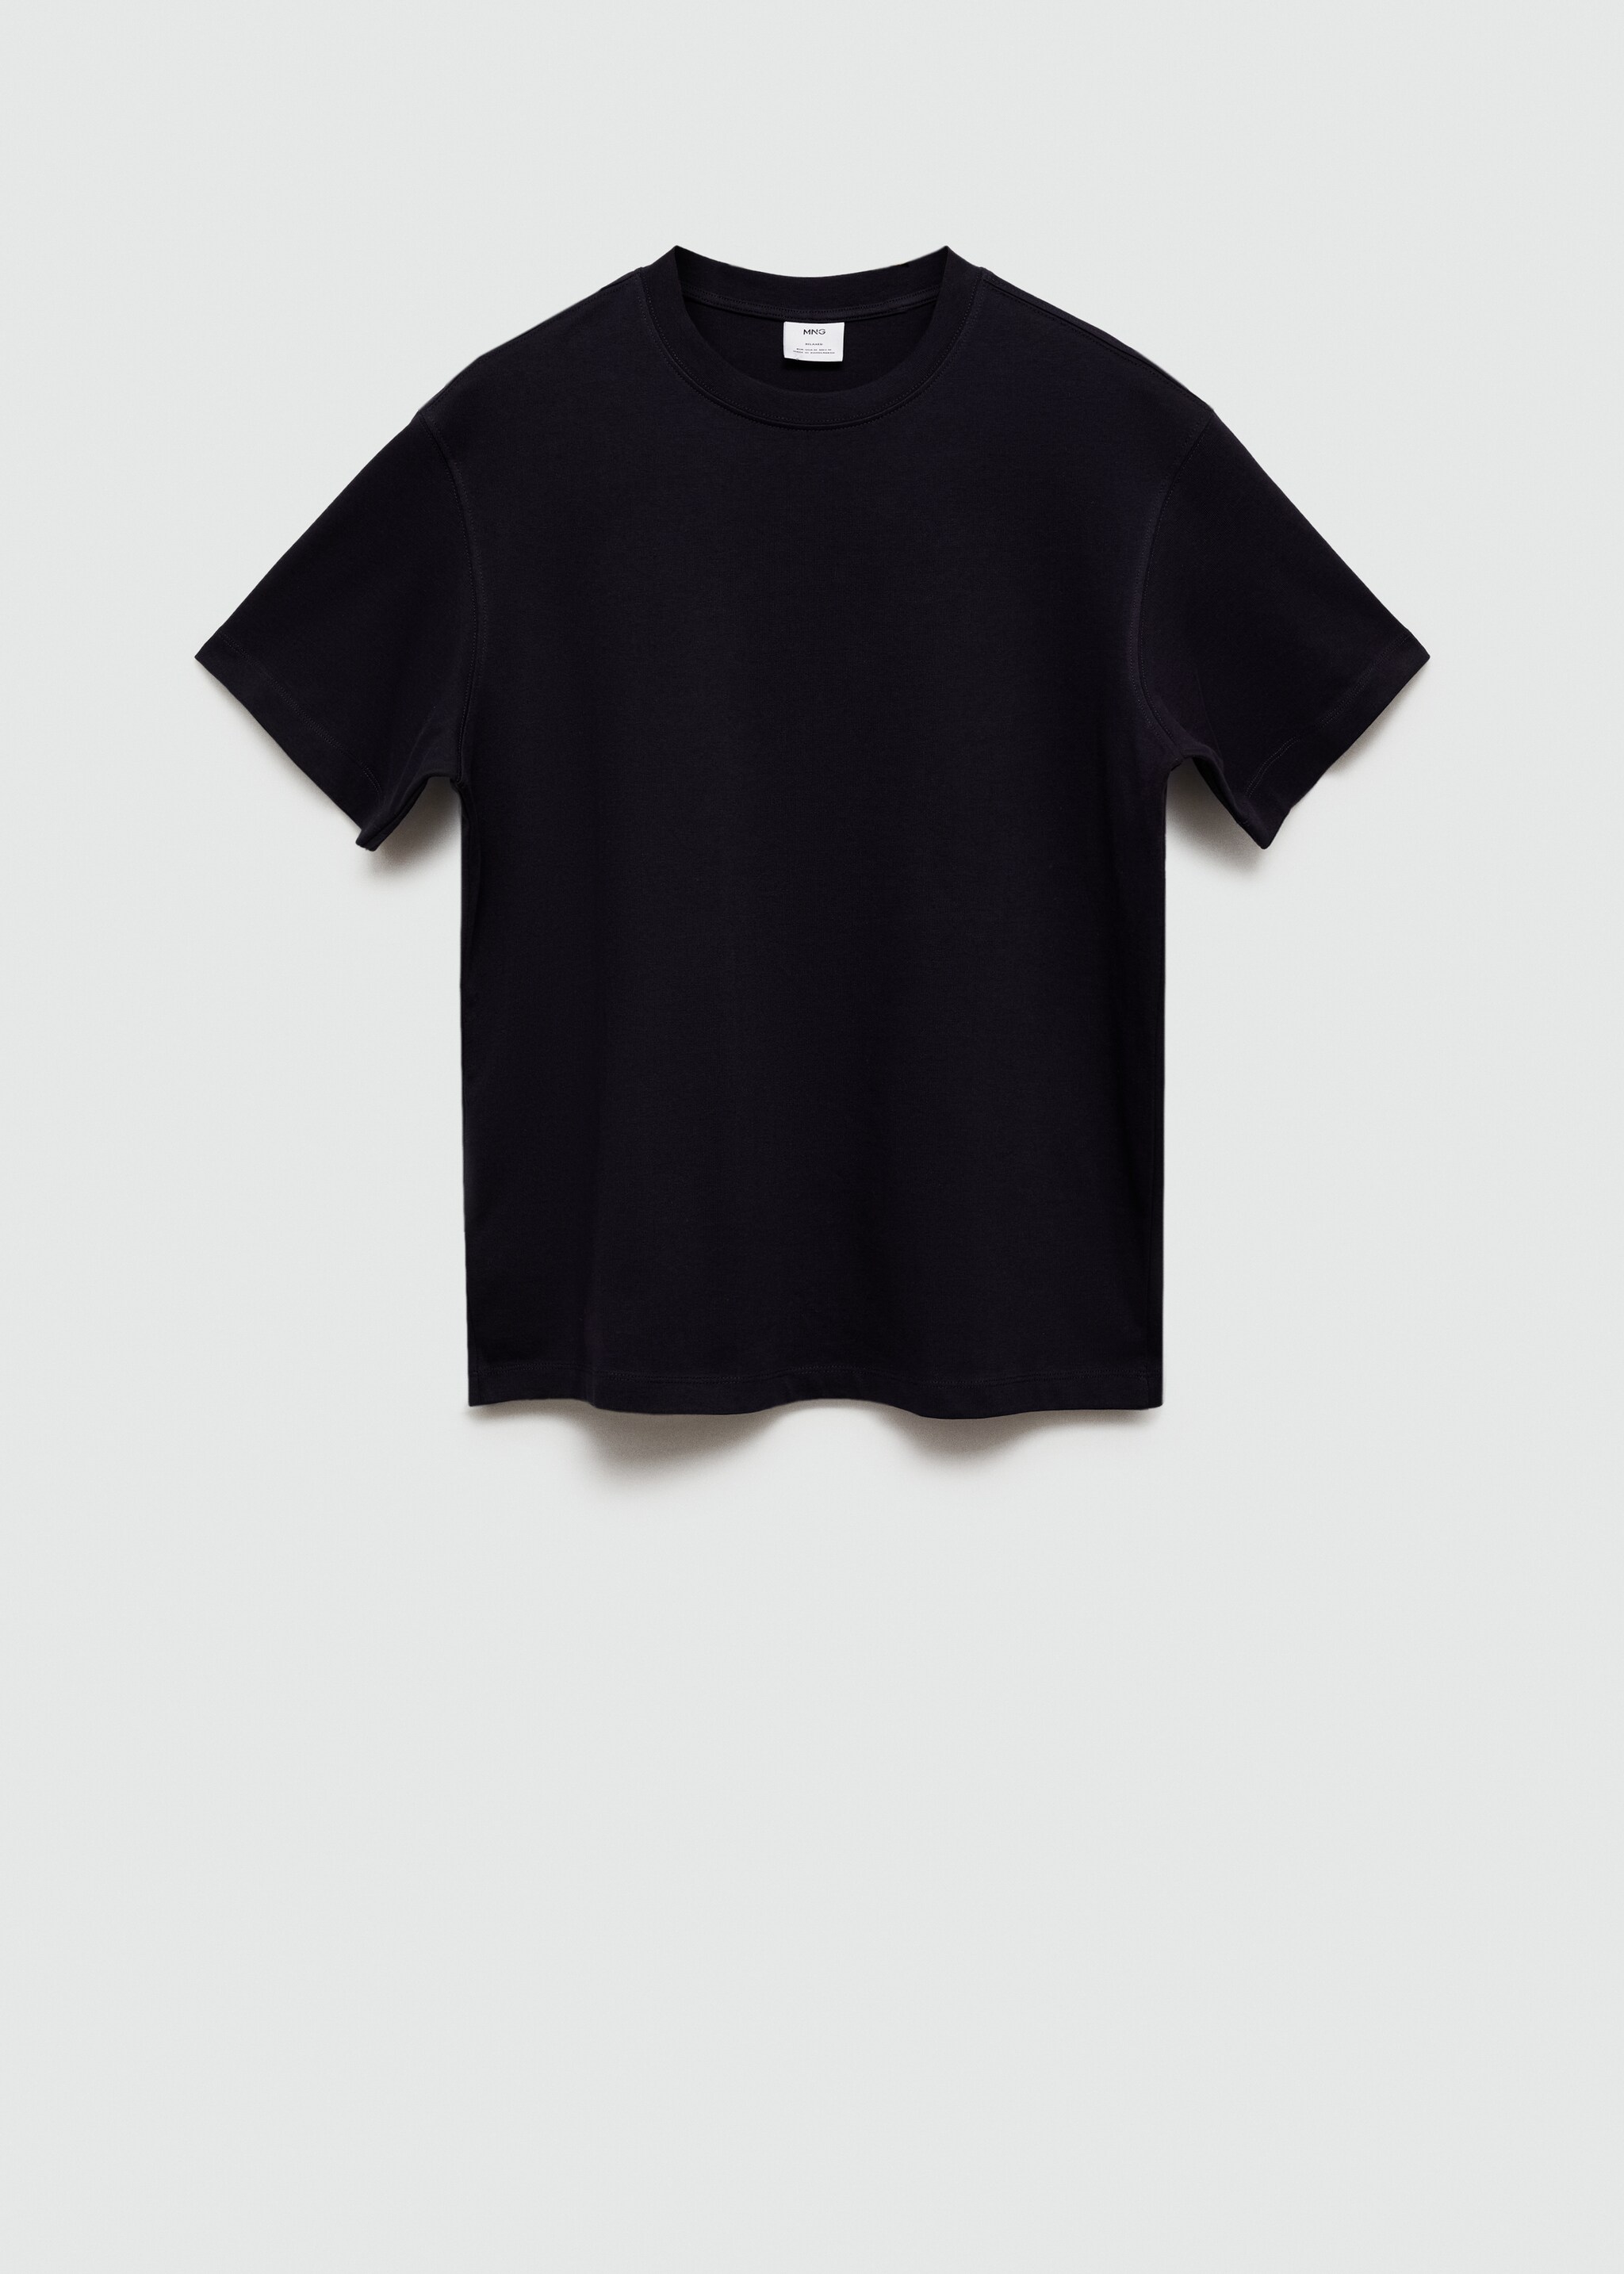 Basic 100% cotton relaxed-fit t-shirt - Article without model